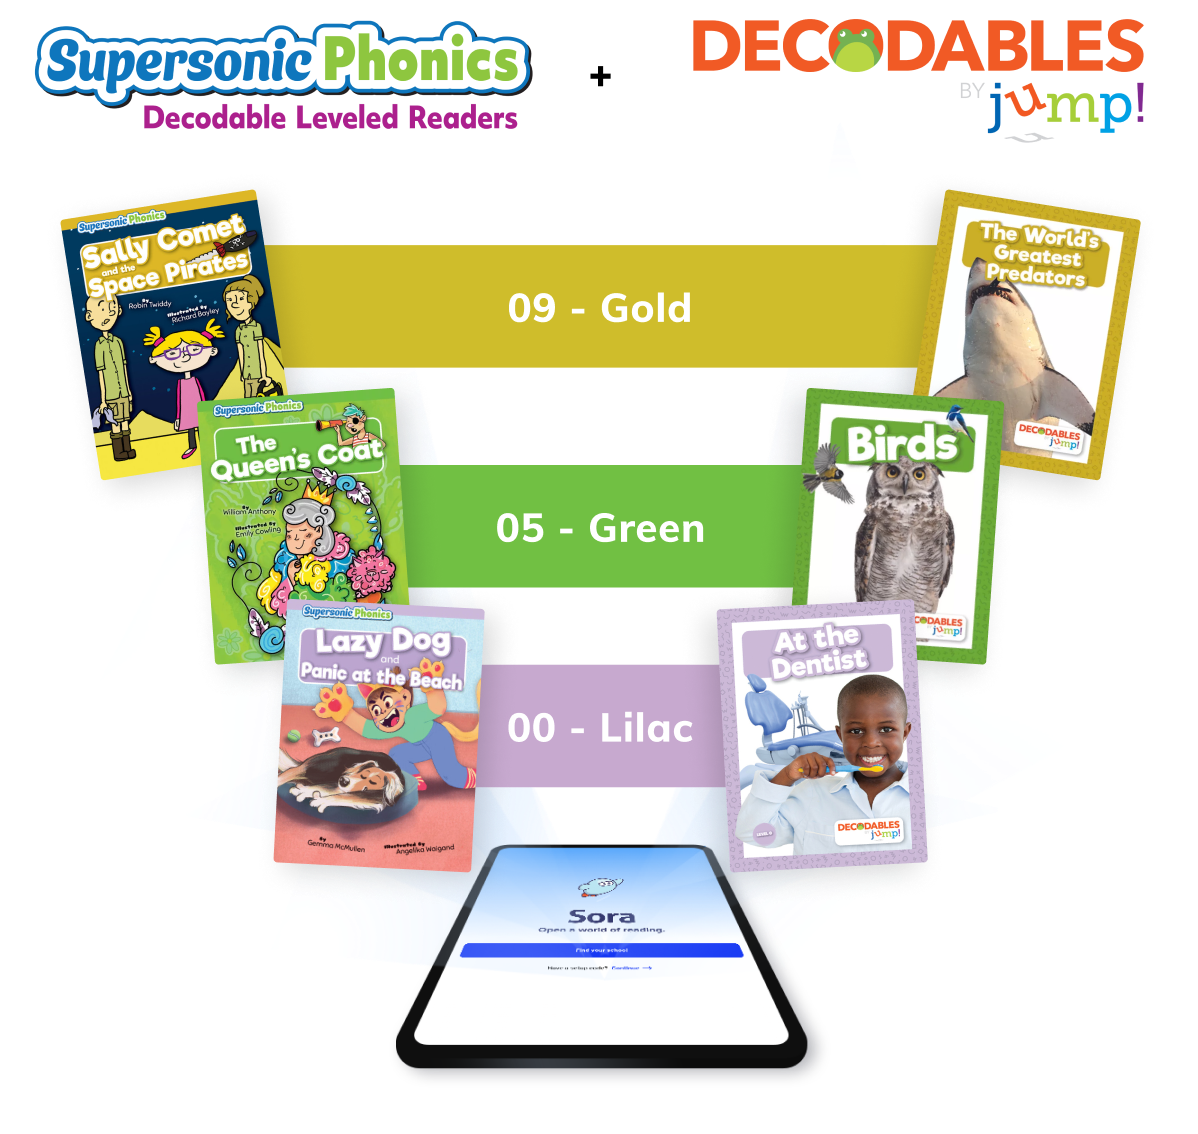 Supersonic Phonics Decodable Leveled Readers + DECODABLES by jump!